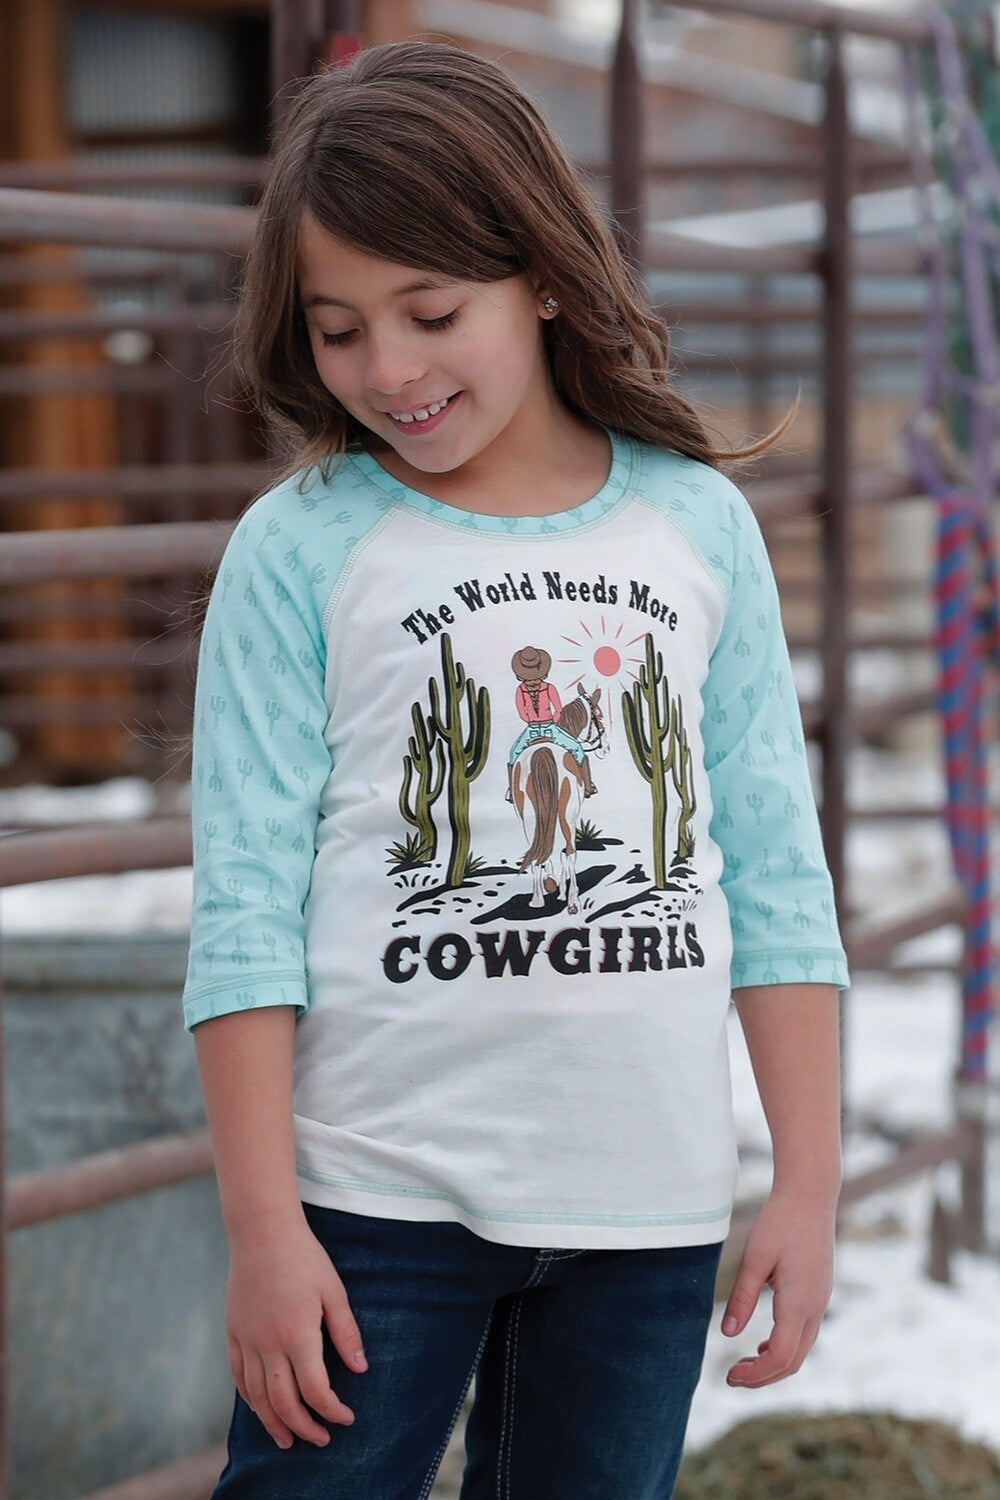 Girl's "The World Needs More Cowgirls" tee